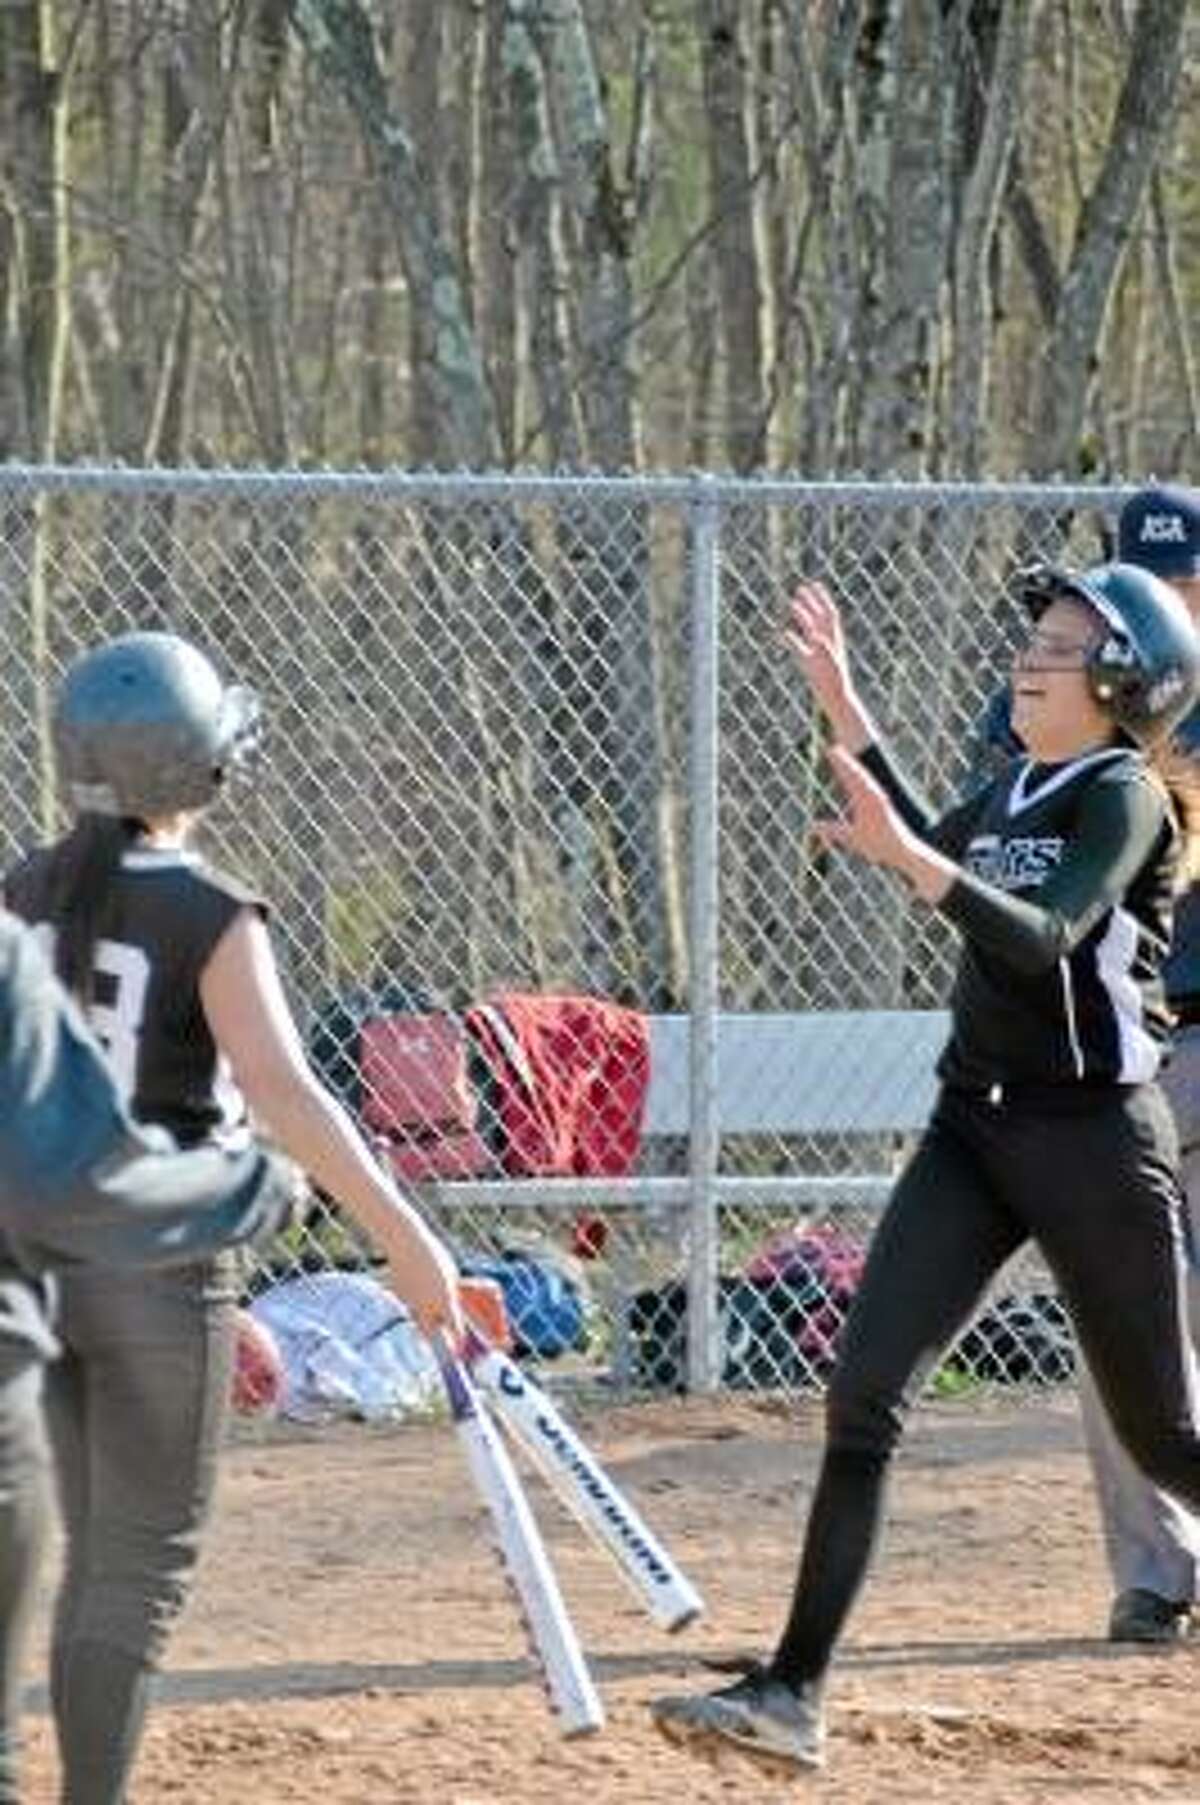 Pete Paguaga/Register Citizen Sophomore, Jill Donston is met at home plate by sophomore Nina Barone, after she hit a two-run homerun, in Thomaston's 11-6 win over Wamogo.